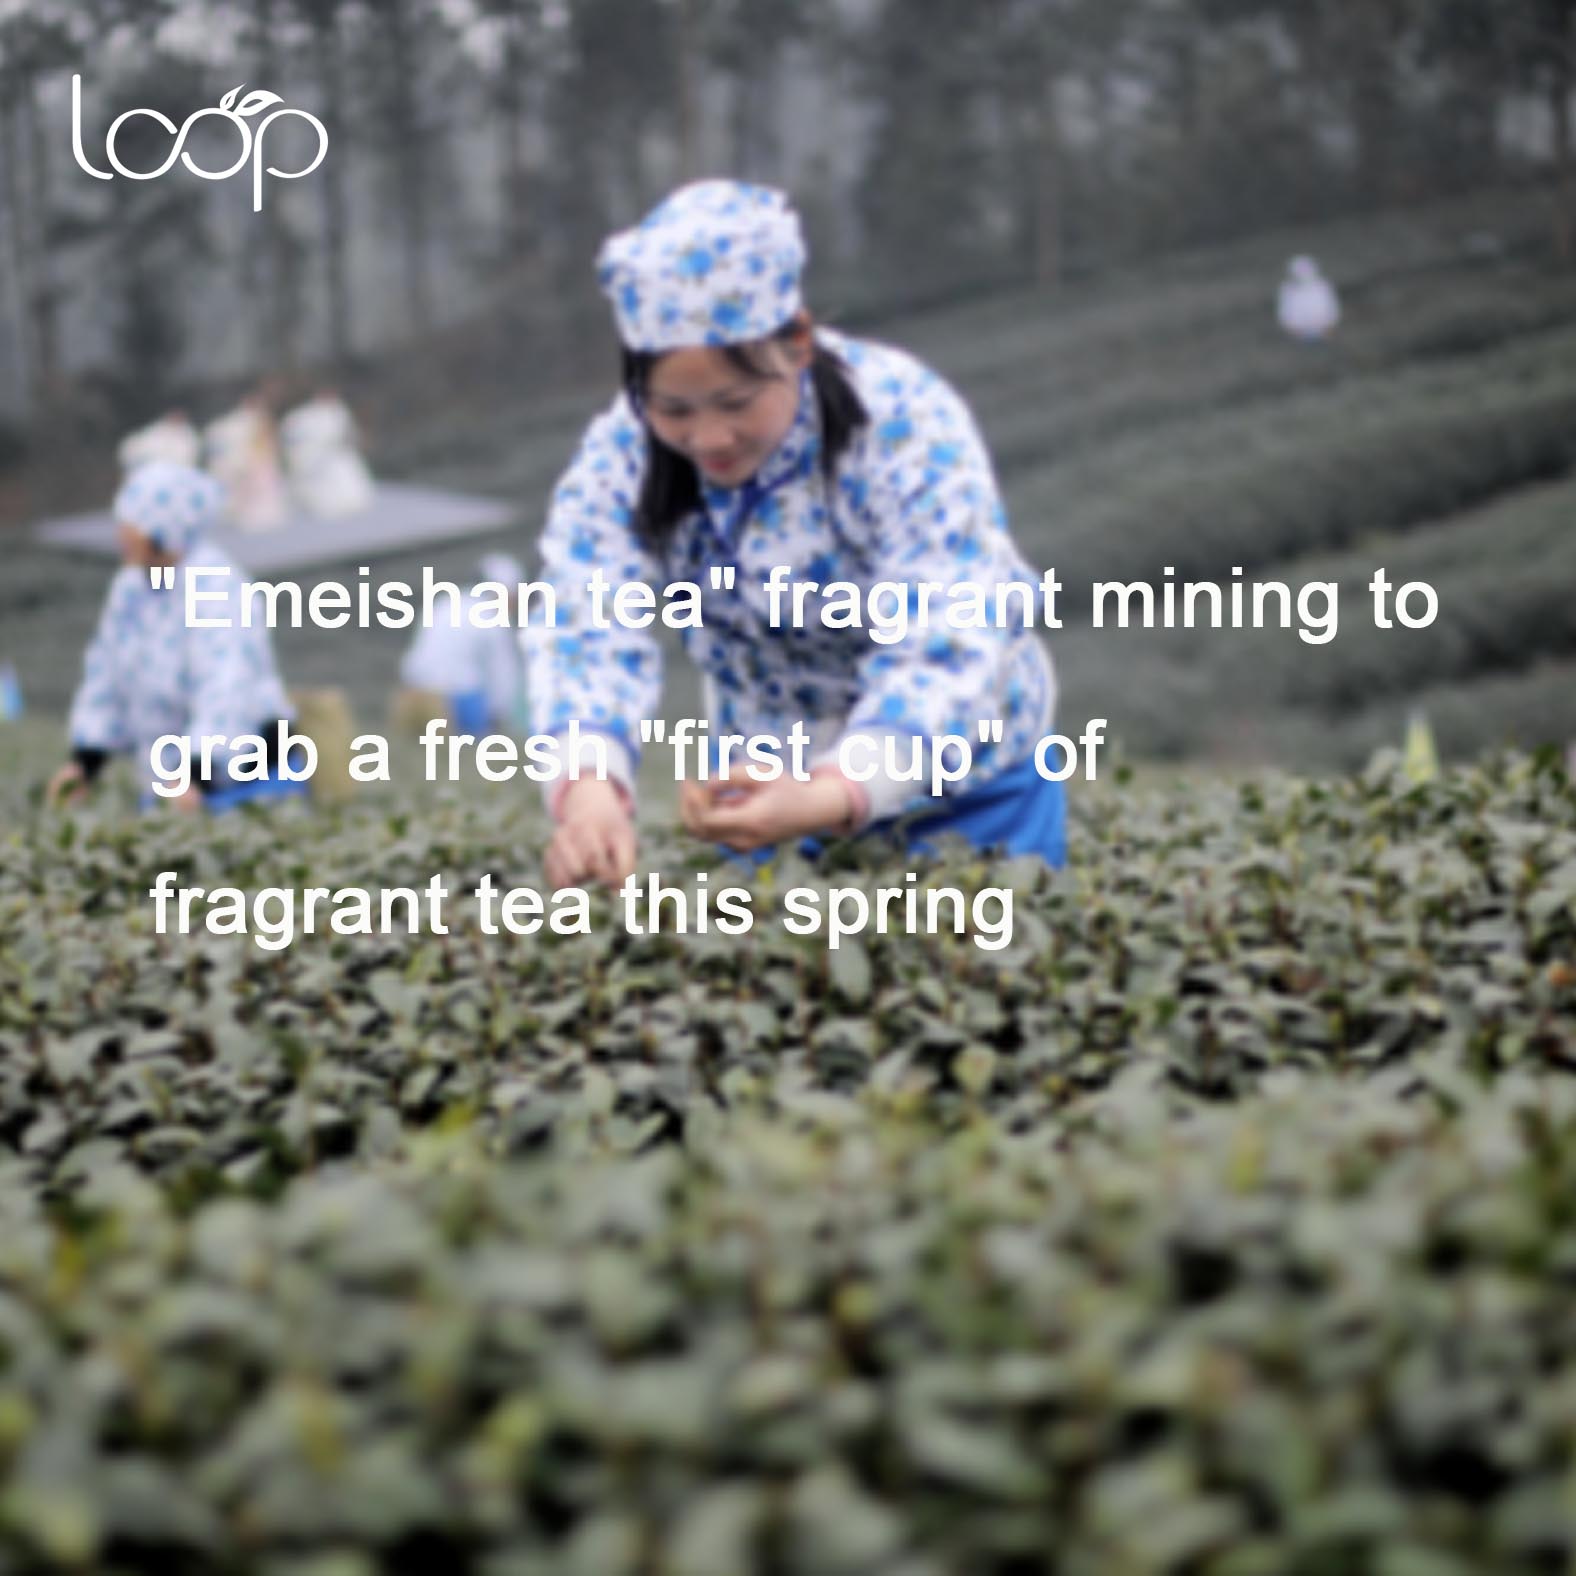 “Emeishan tea” fragrant mining to grab a fresh “first cup” of fragrant tea this spring